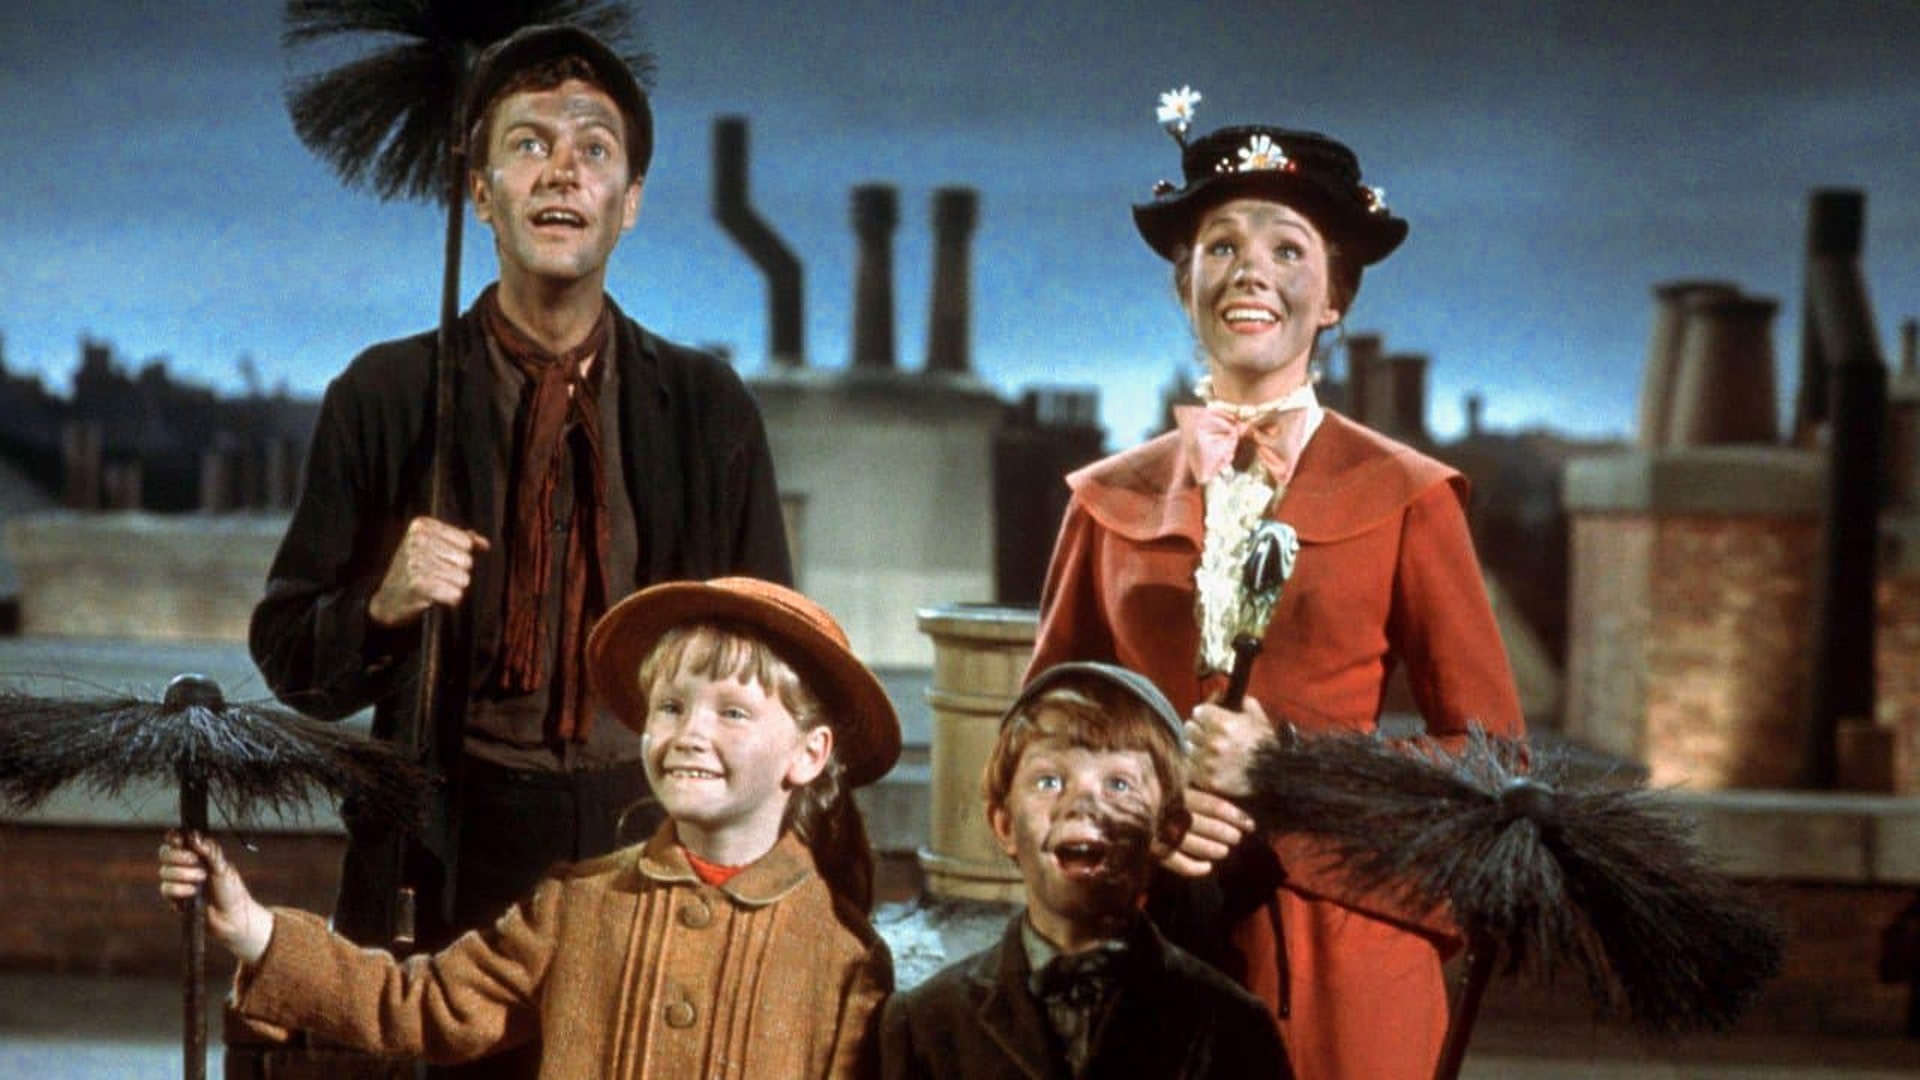 Mary Poppins Movie - 42 Mary Poppins (1964) Movie Facts You Haven't Read Before